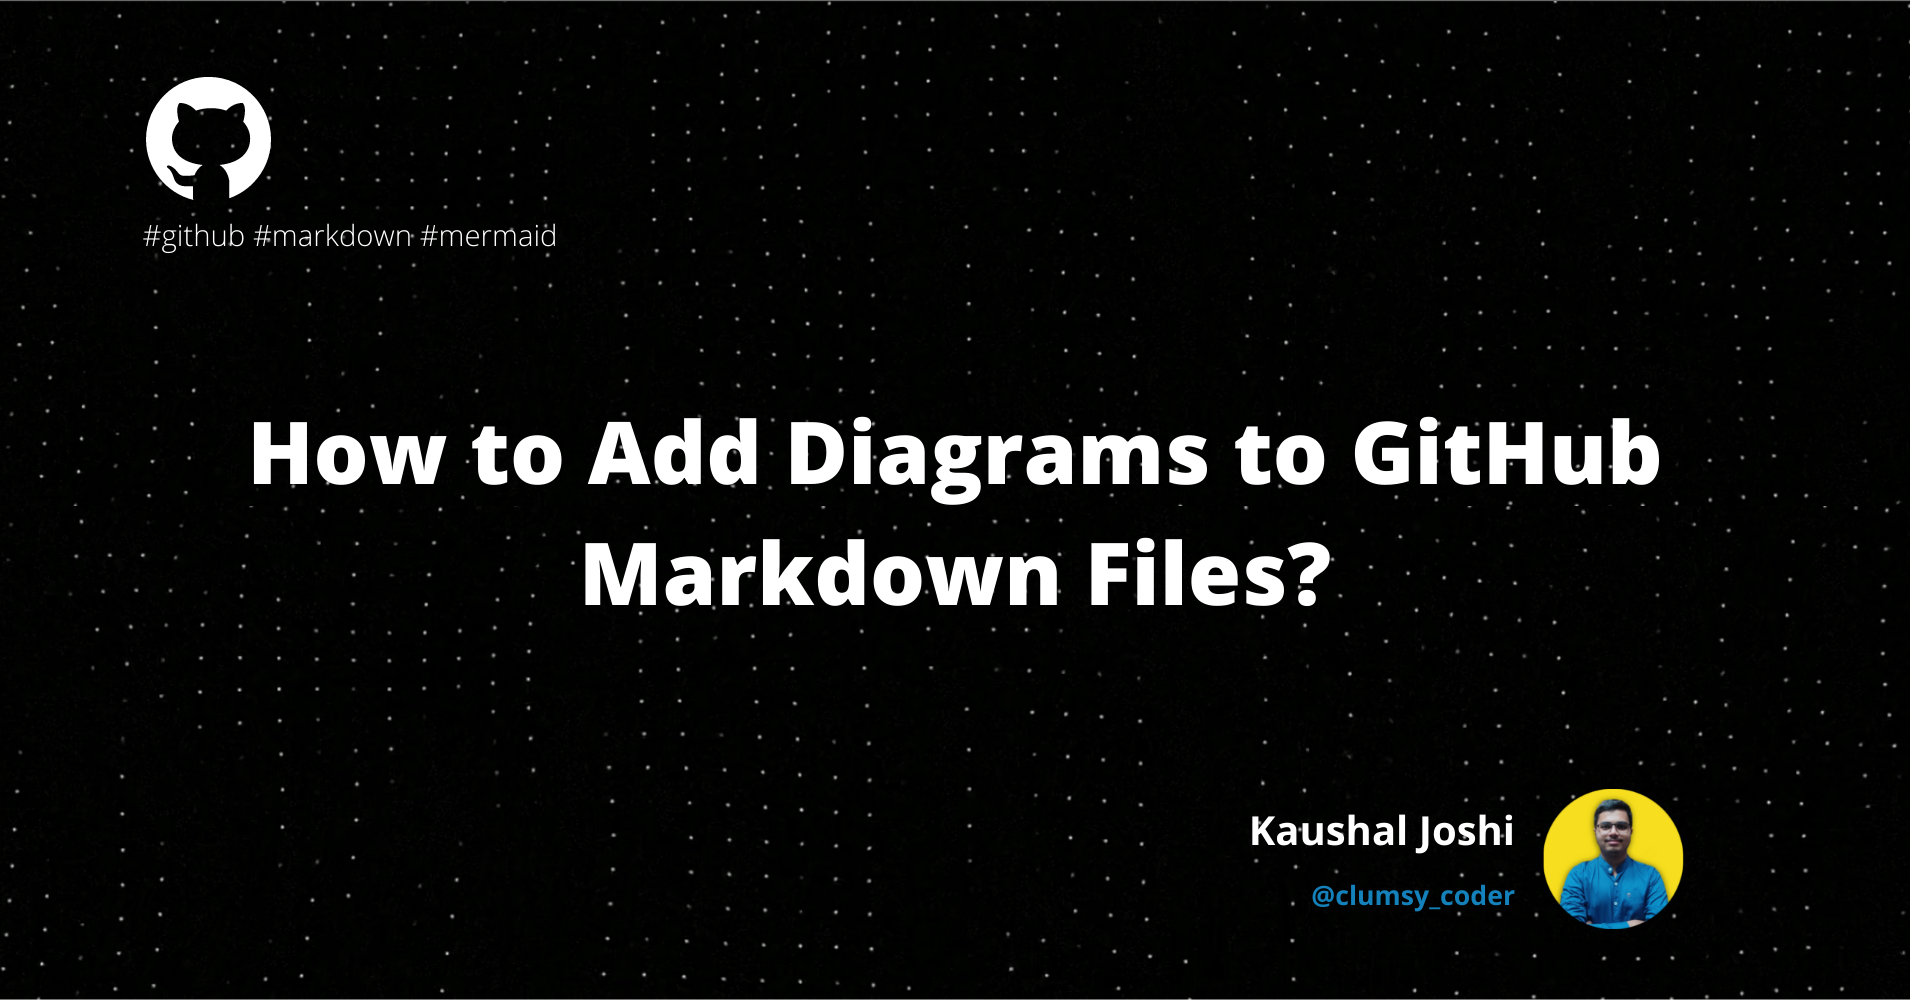 How to Add Diagrams to GitHub Markdown Files